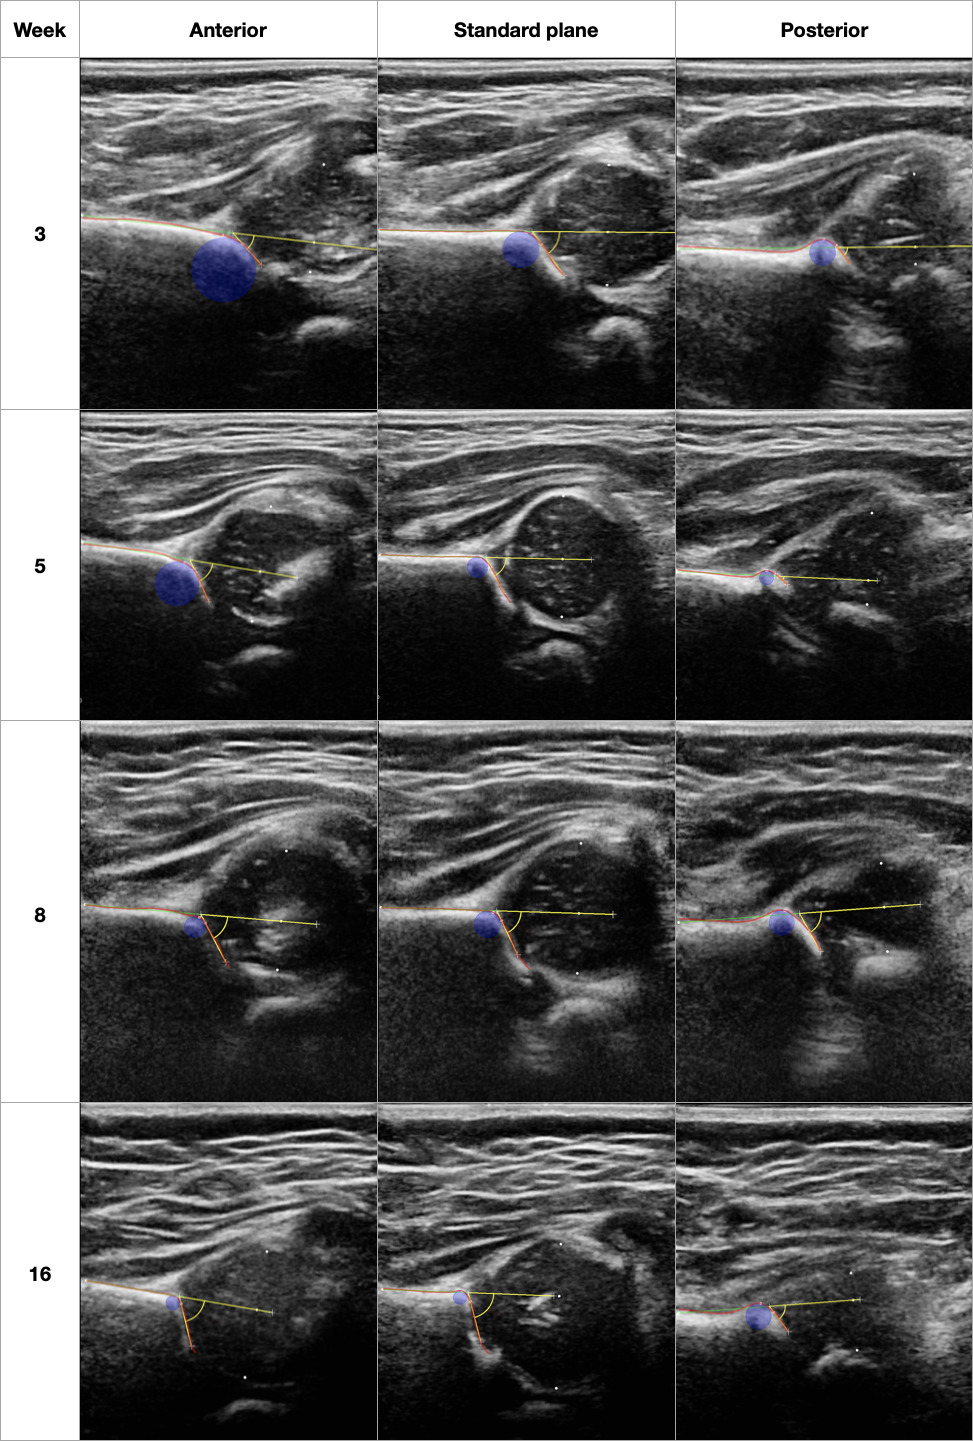 Fig. 3 
          Variation of hip shape by age and anteroposterior location in the joint. Typical images from 3D ultrasound scans in different female left hips at age three, five, eight, and 16 weeks (in rows) demonstrating shape of hip in Graf’s standard plane (SP) as well as in anterior and posterior regions. α angle (yellow), femoral head coverage (FHC; represented by white dots), and osculating circle radius (OCR; blue circle) indices were calculated semi-automatically from countours (red). Note that the acetabulum is generally steeper in the Graf’s SP than in the anterior slices, and also is perceptibly steeper in older patients than younger. In these patients: week 3: αSP = 56.1°, FHCSP = 44.9%, acetabular contact angle (ACA)SP = 54.7°, OCRSP = 21.4mm; week 5: αSP = 62.3°, FHCSP = 47.8%, ACASP = 56.3°, OCRSP = 13.5mm; week 8: αSP = 63.0°, FHCSP = 46.2%, ACASP = 59.3°, OCRSP = 17.0mm; week 16: αSP = 72.2°, FHCSP = 62.3%, ACASP = 68.5°, OCRSP = 9.6mm.
        